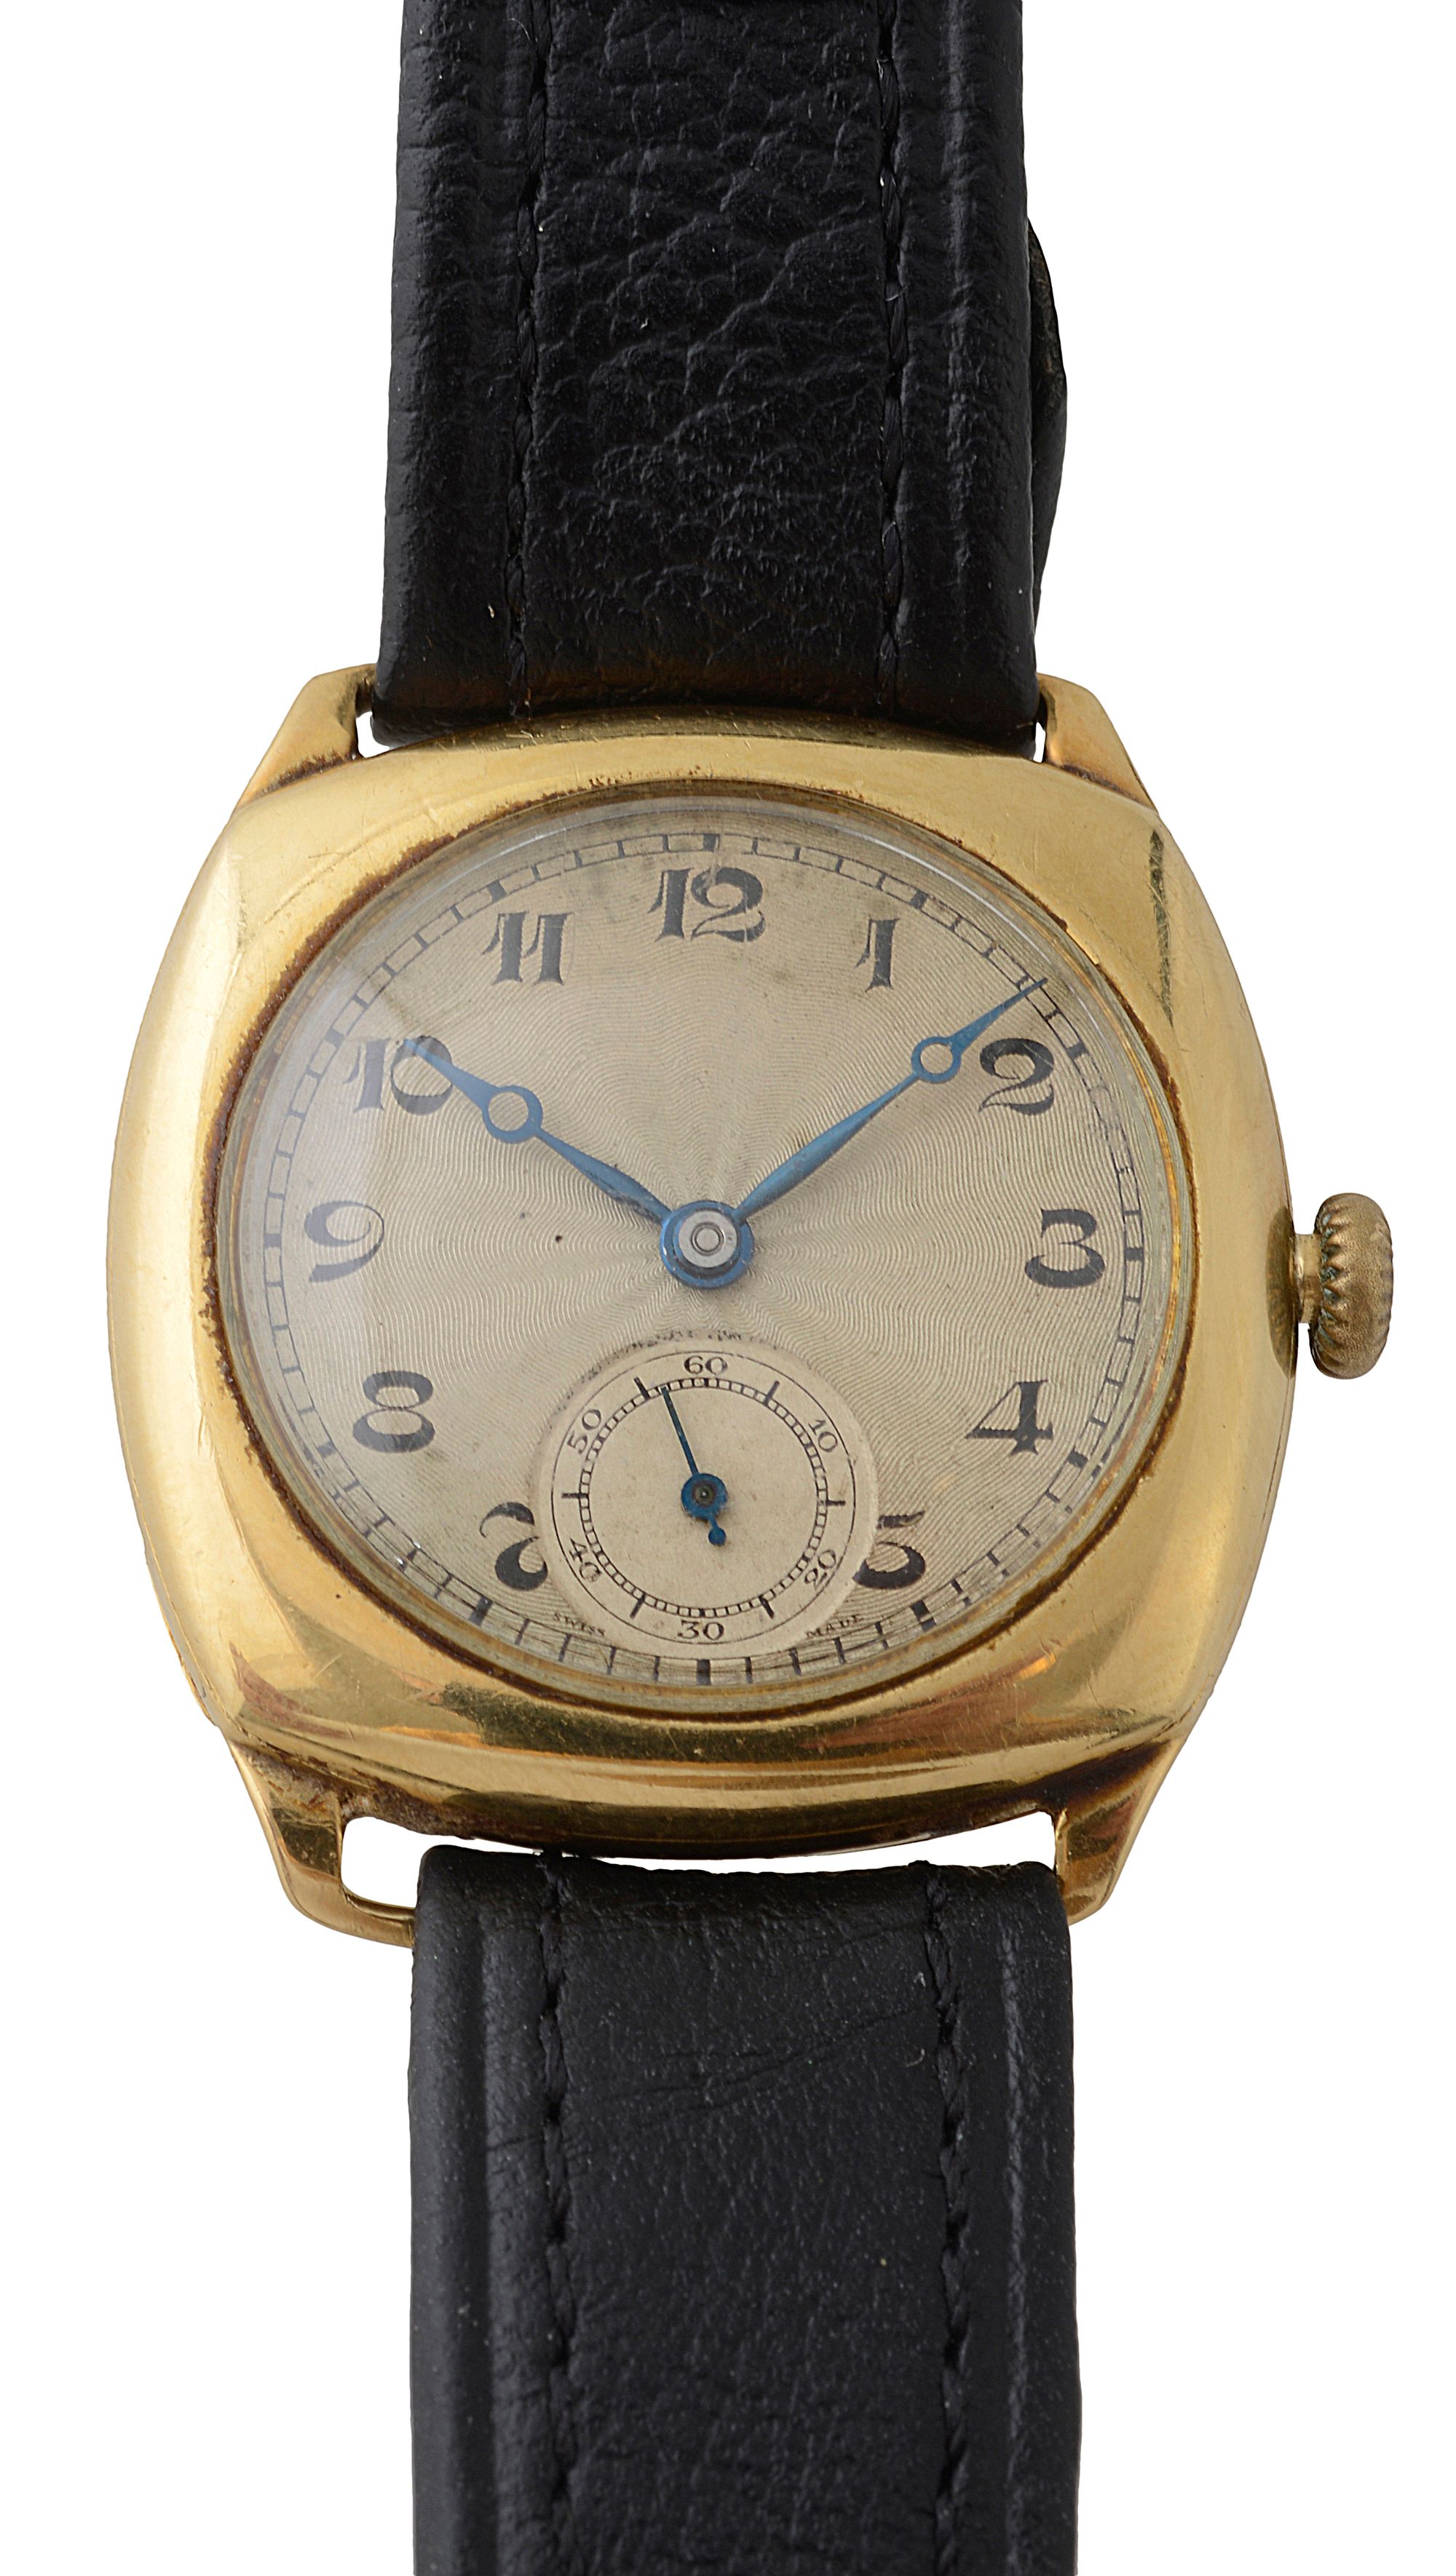 An 18ct gold 1930s manual wind wrist watch - Image 2 of 2